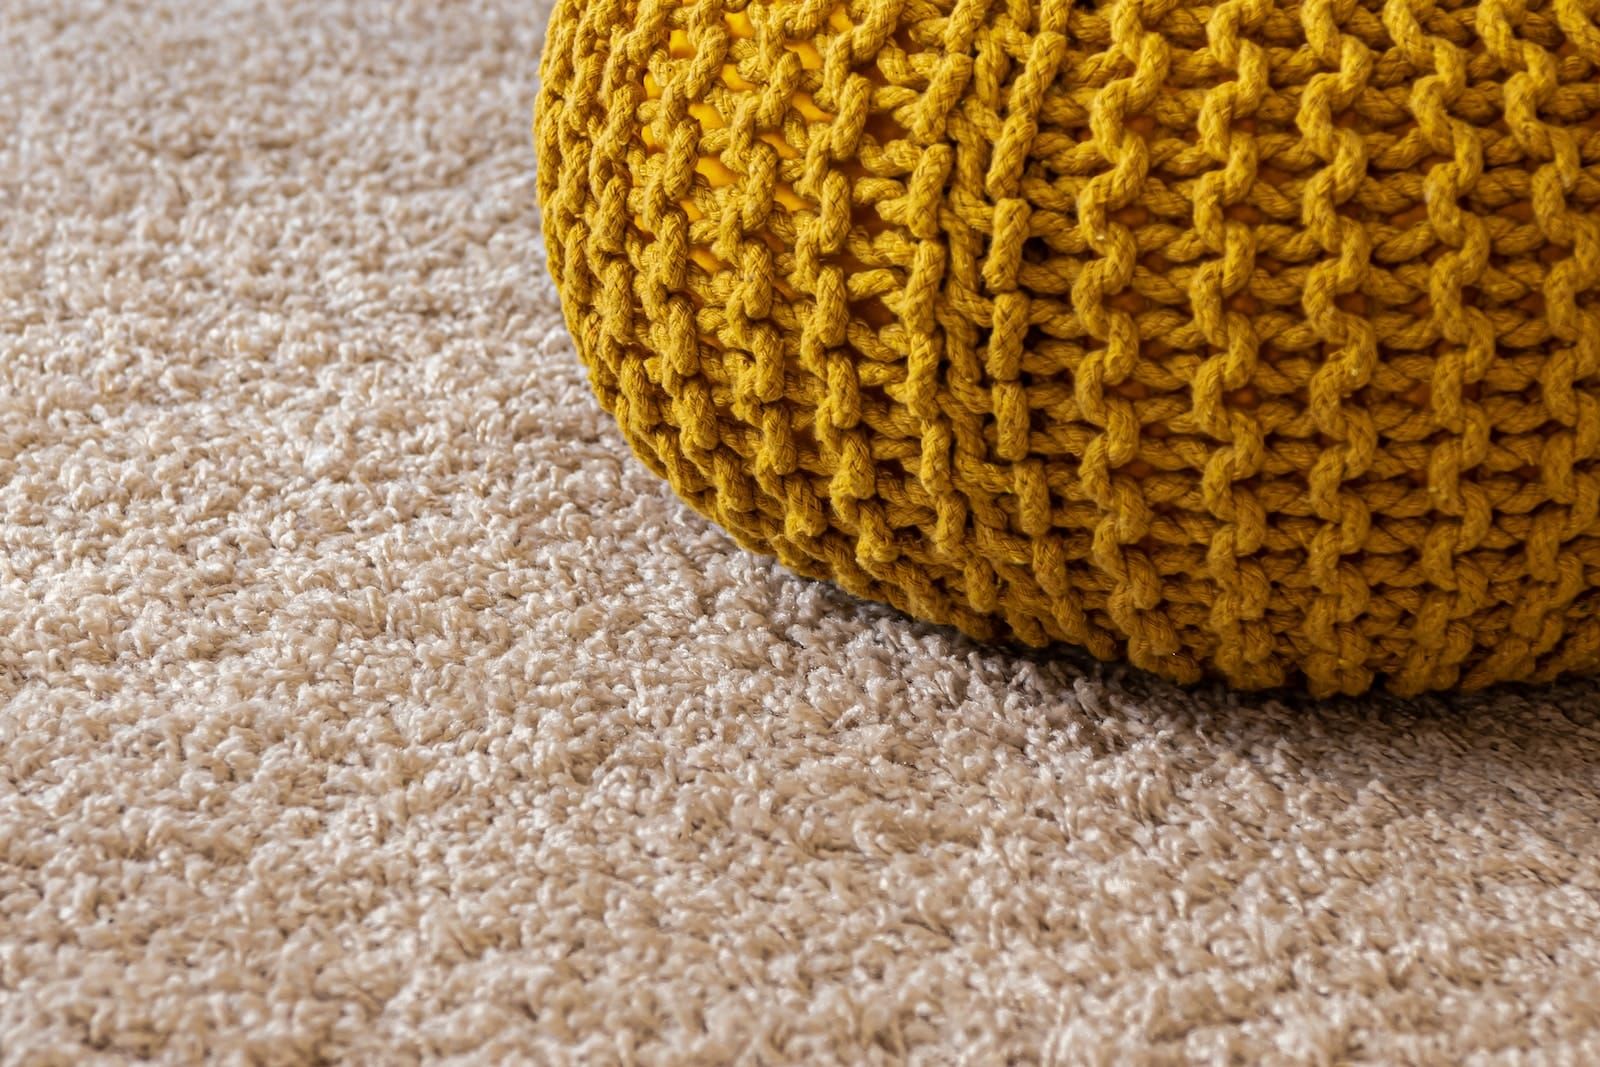 Tip 7: Replace Worn Carpets or Rugs